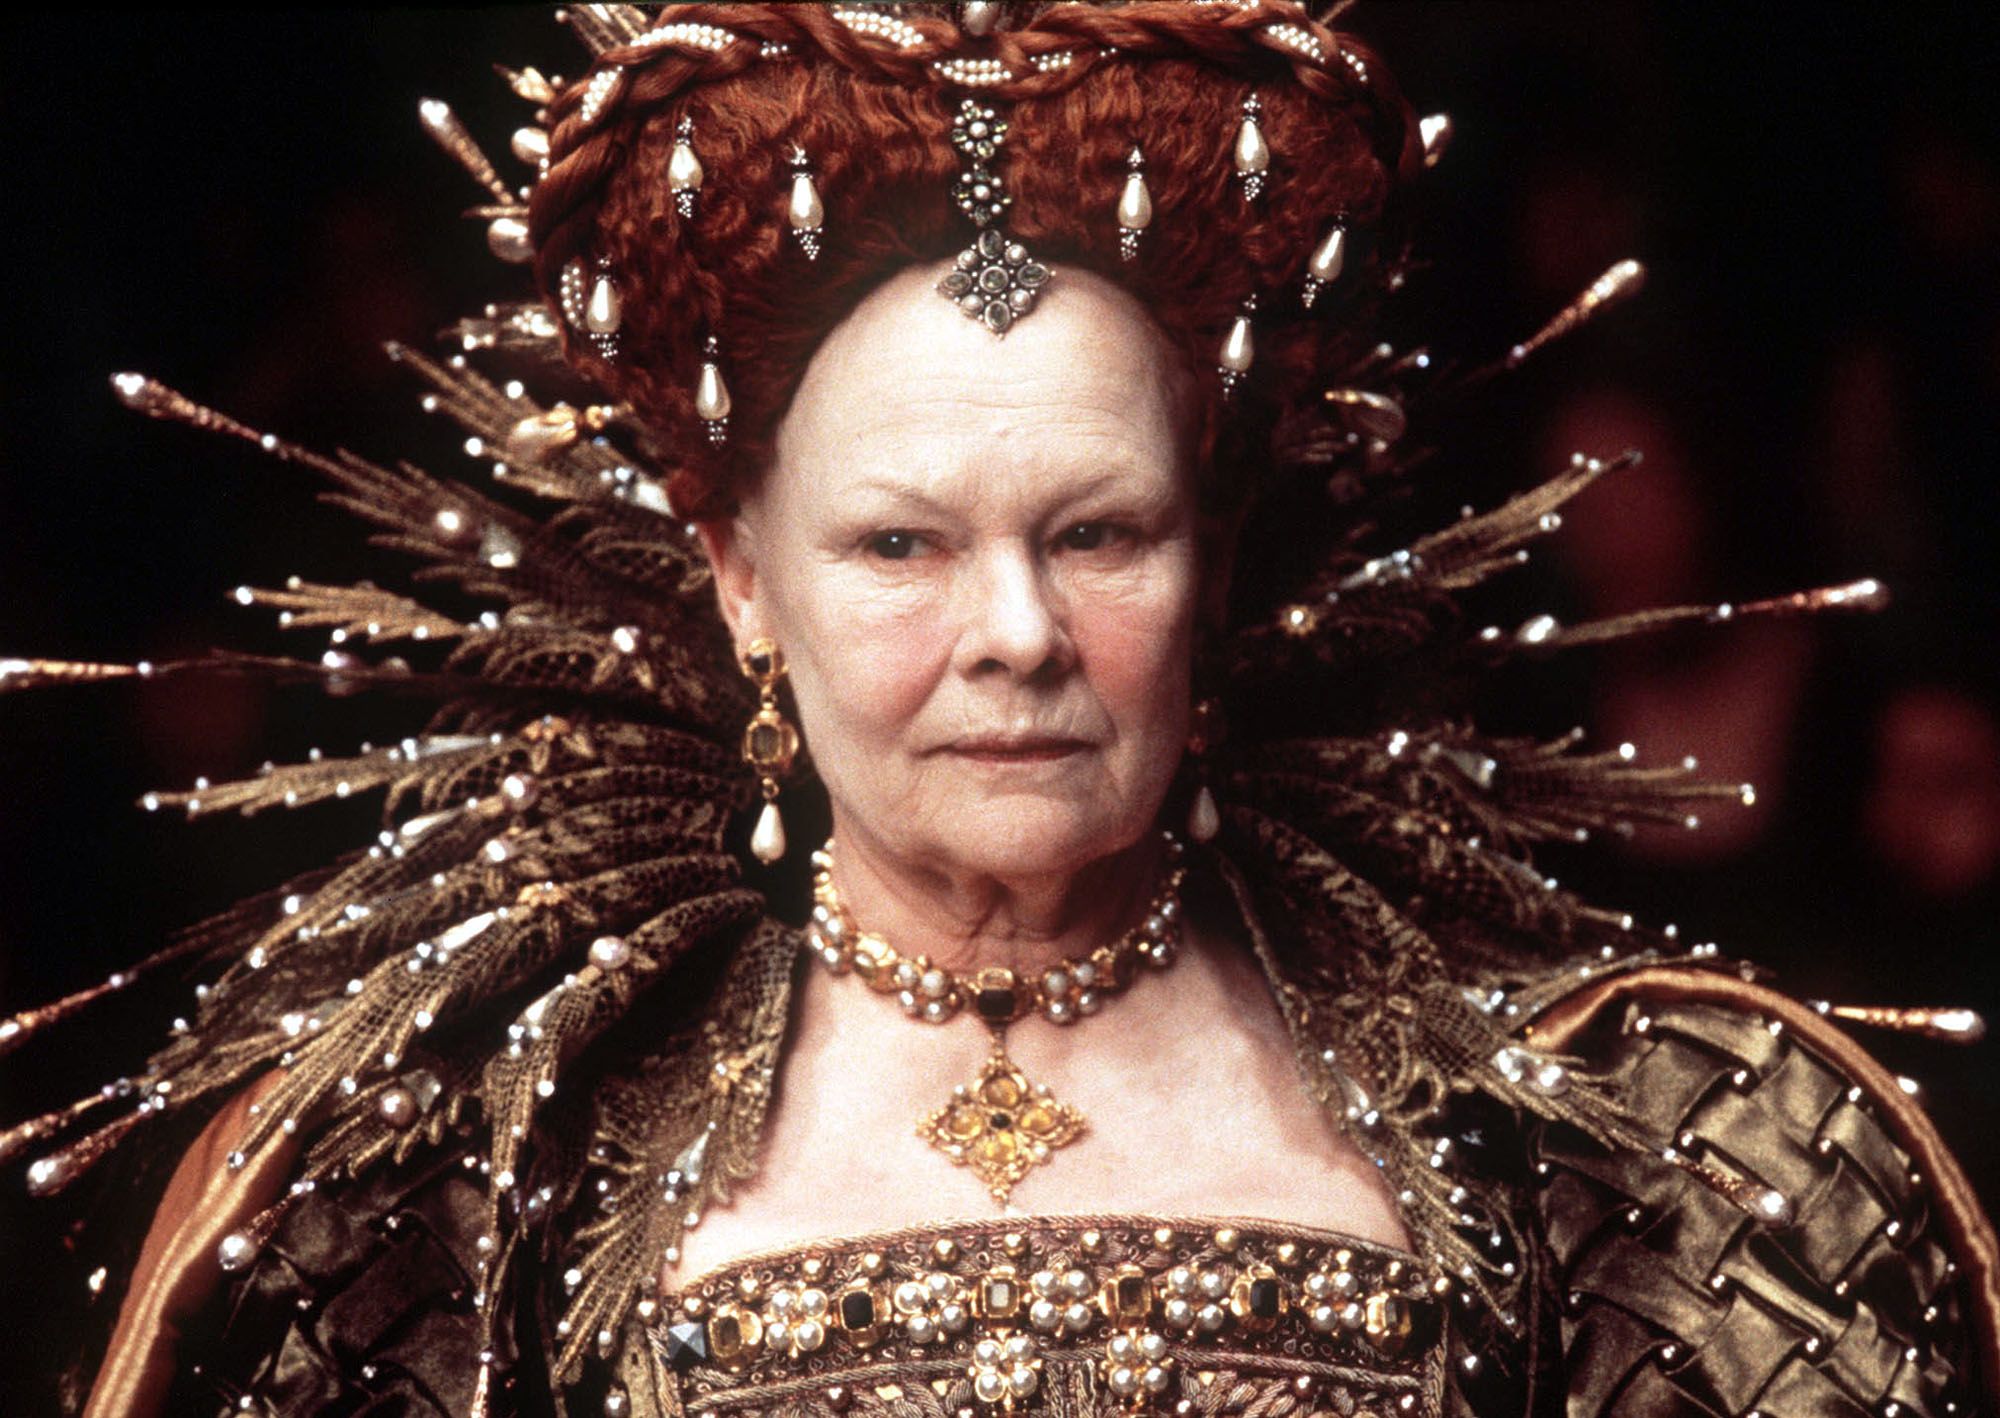 Judy Dench as Queen Elizabeth I in the 1998 film "Shakespeare in Love" for which she won the Oscar for Best Actress in a Supporting Role | Source: Getty Images